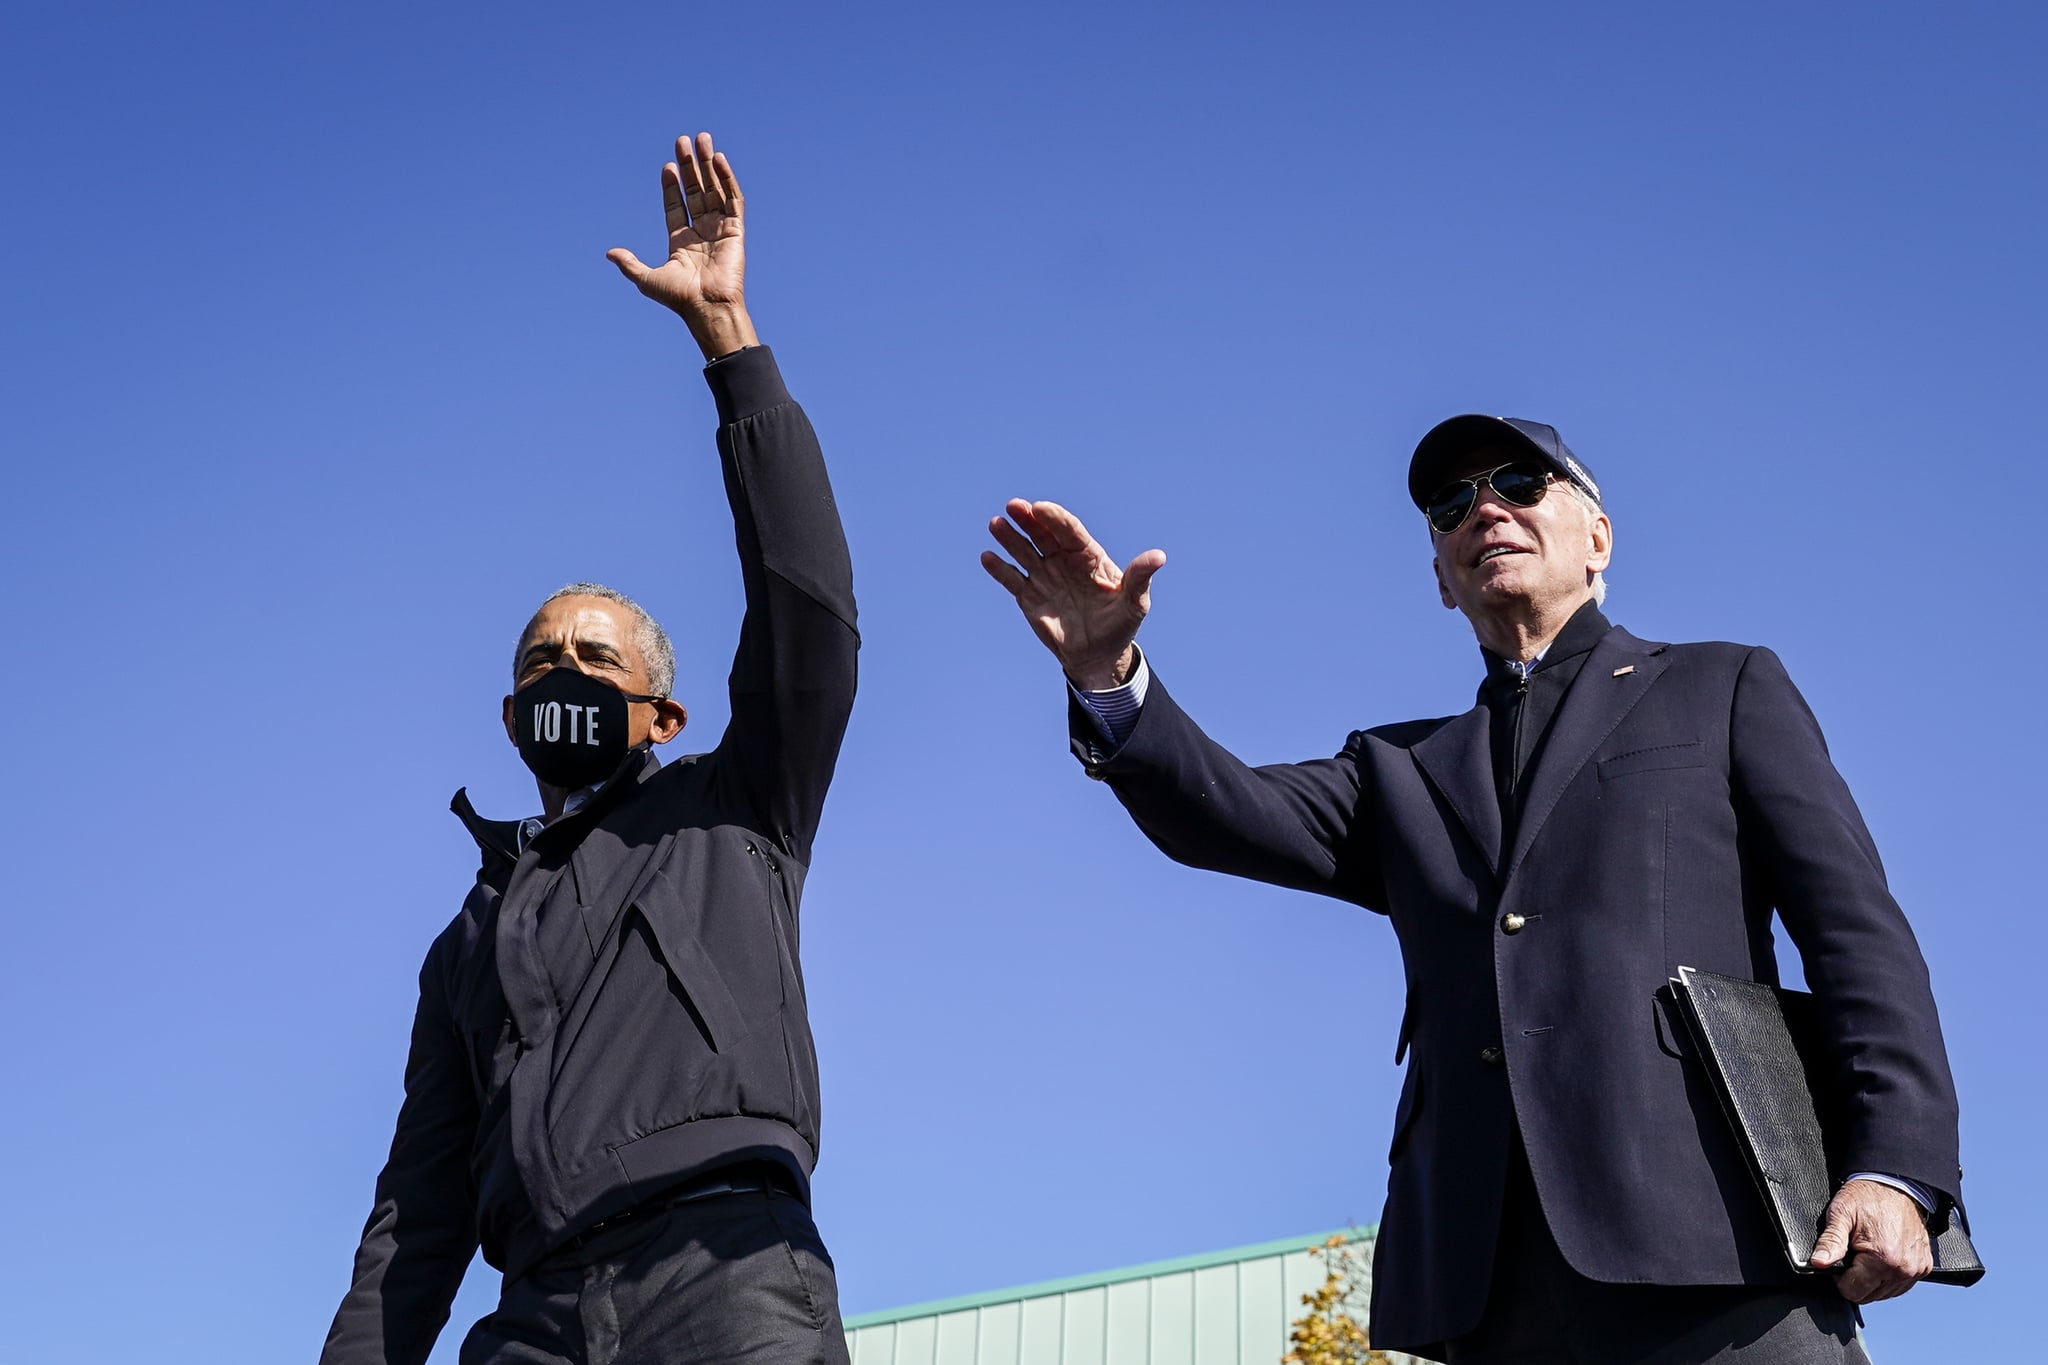 FLINT, MI - OCTOBER 31: Former U.S. President Barack Obama and Democratic presidential nominee Joe Biden wave to the crowd at the end of a drive-in campaign rally at Northwestern High School on October 31, 2020 in Flint, Michigan. Biden is campaigning with former President Obama on Saturday in Michigan, a battleground state that President Donald Trump narrowly won in 2016. (Photo by Drew Angerer/Getty Images)